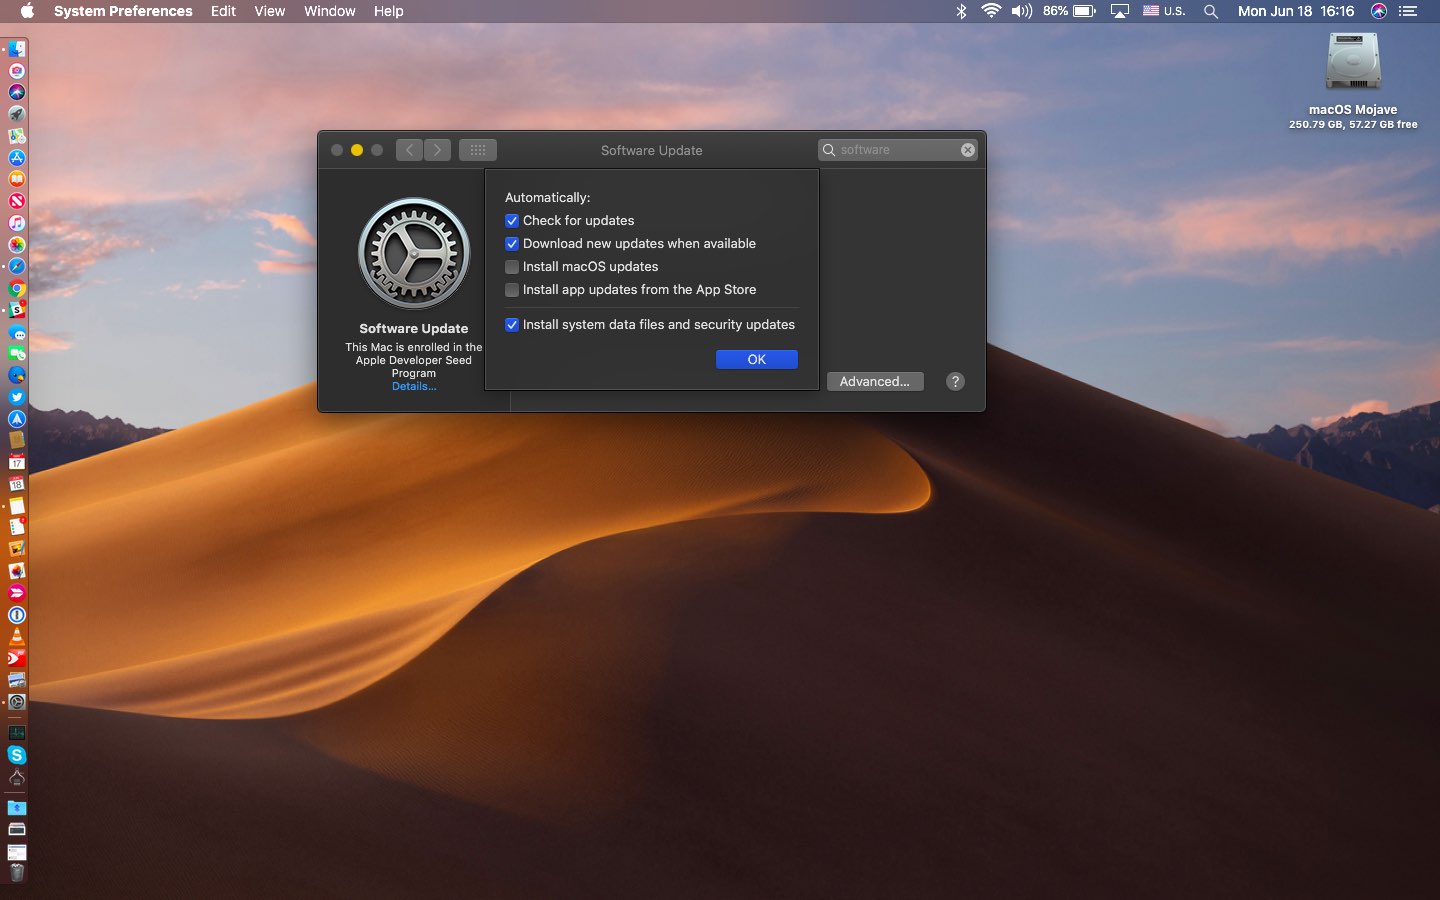 Installing software update on mac and computer keeps restarting windows 10